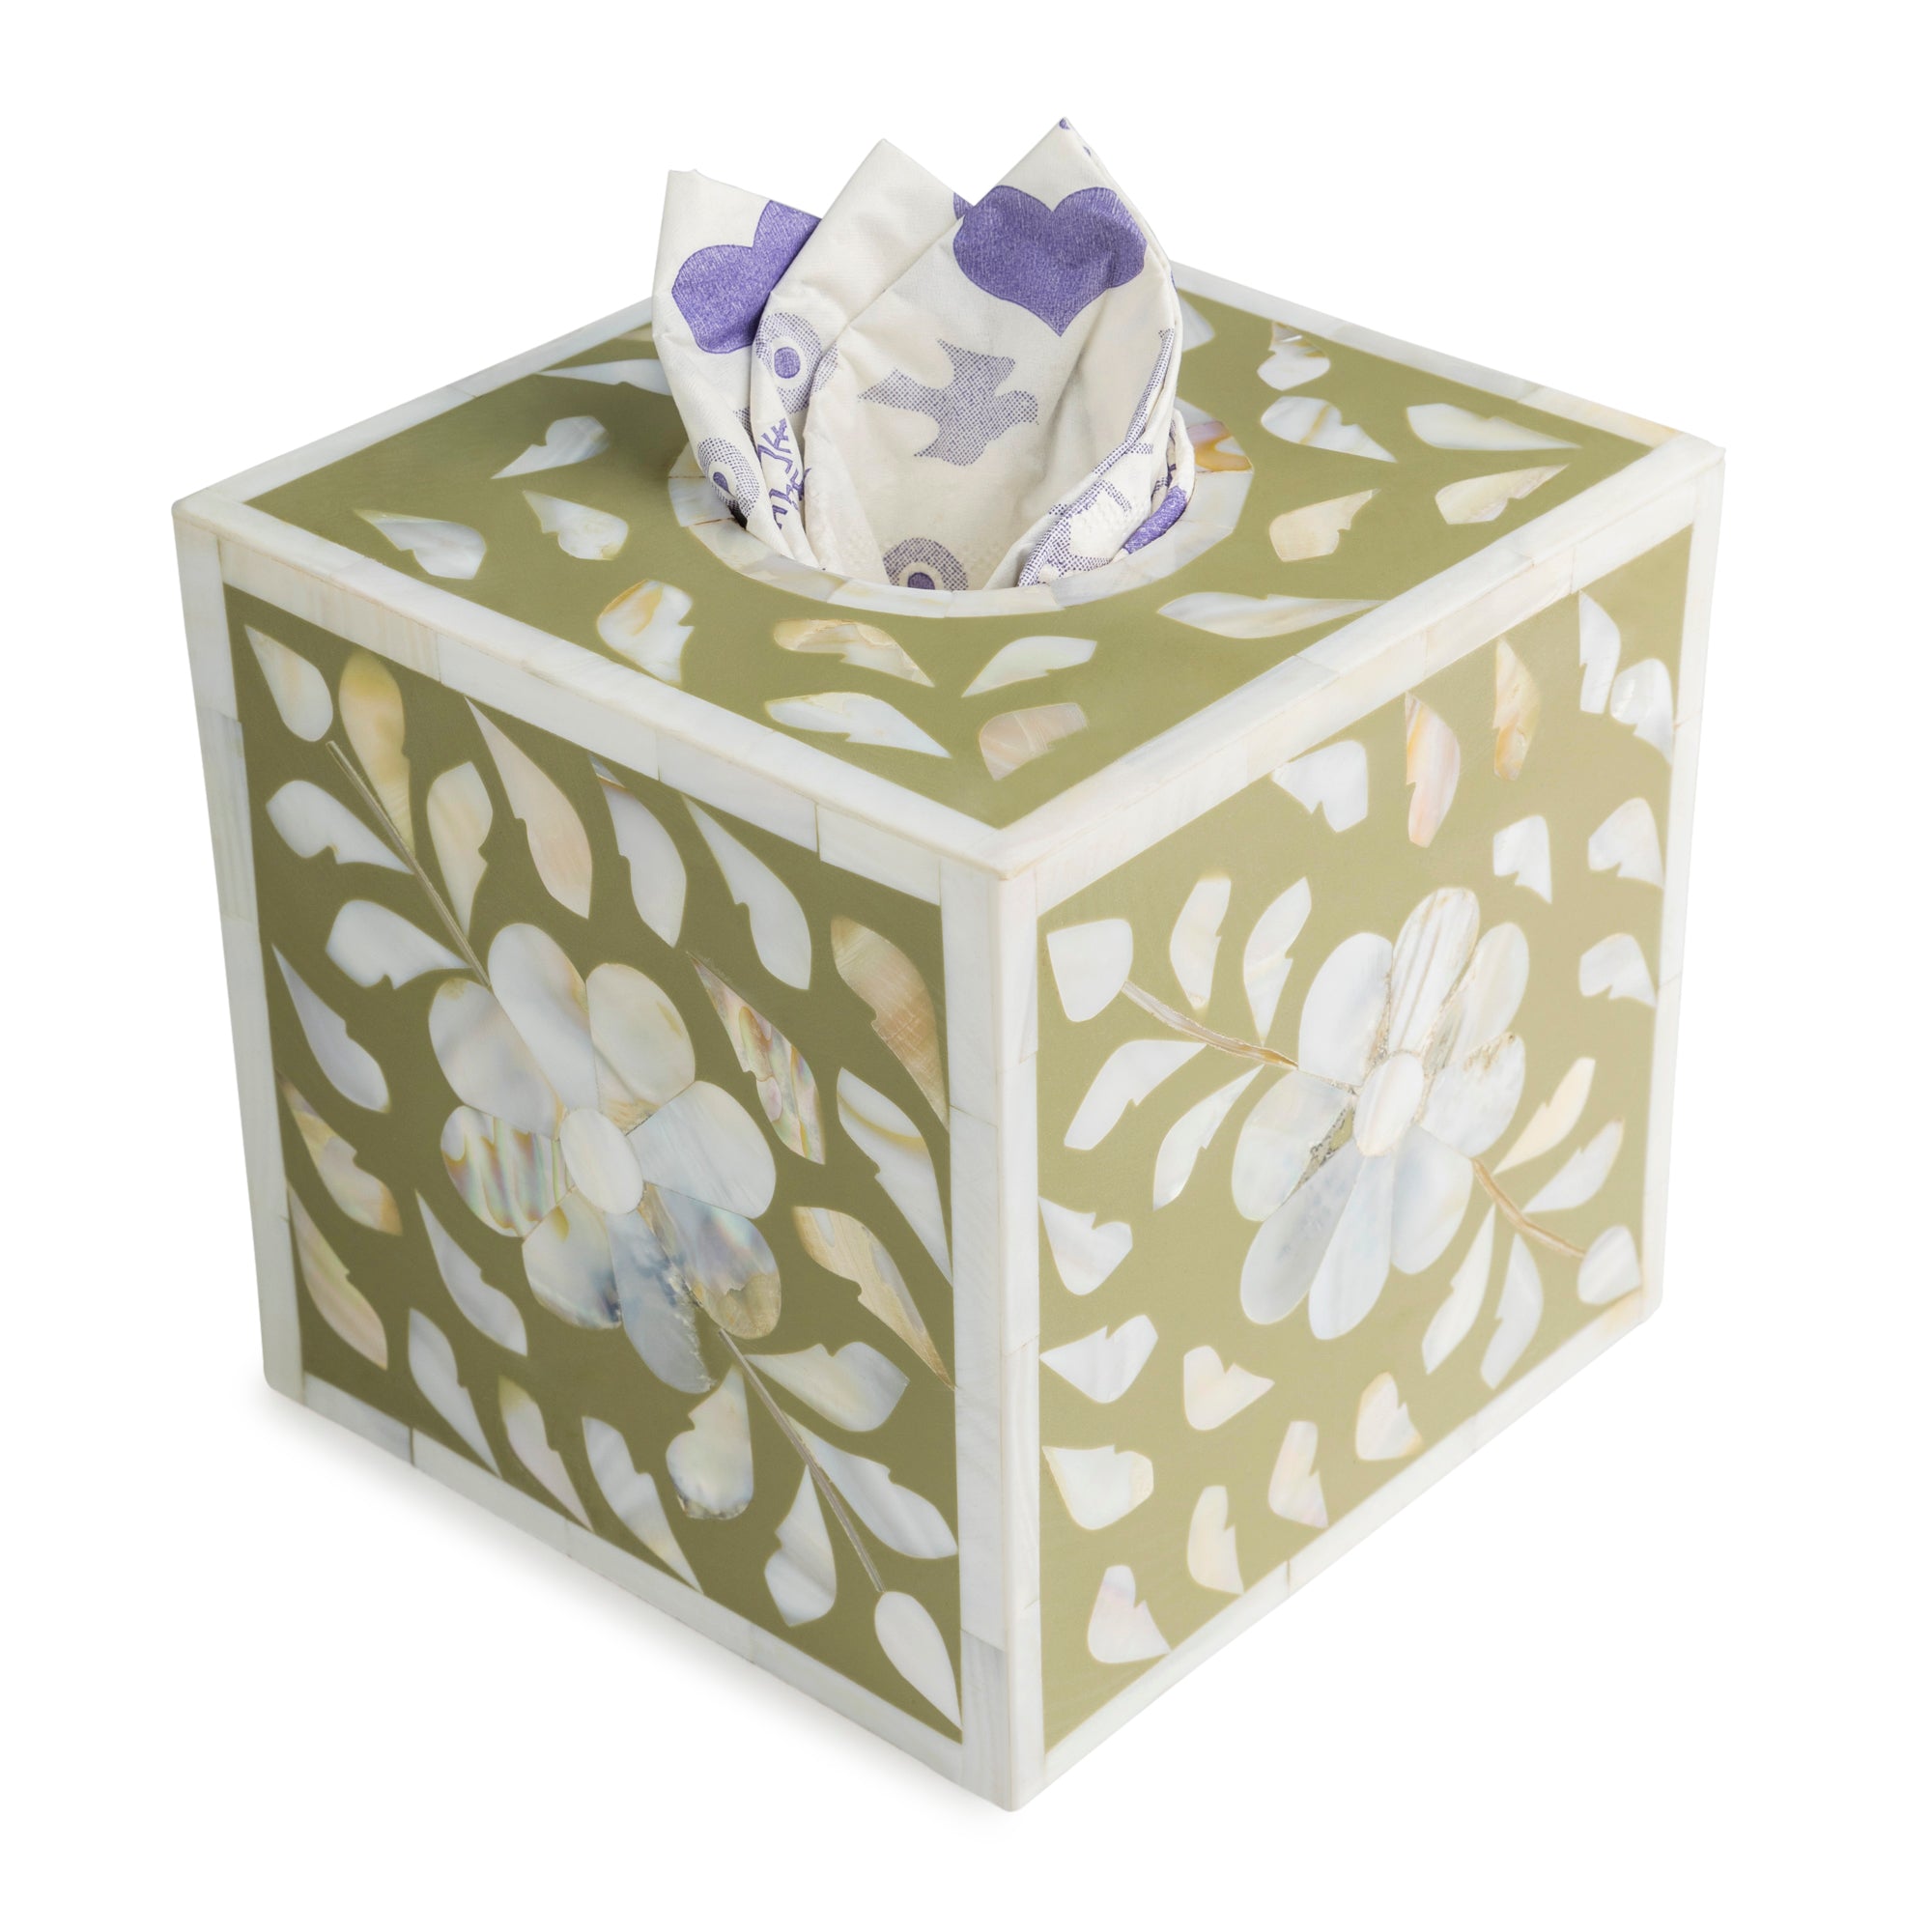 Wood Tissue Box Cover (6 x 6 x 6 in)